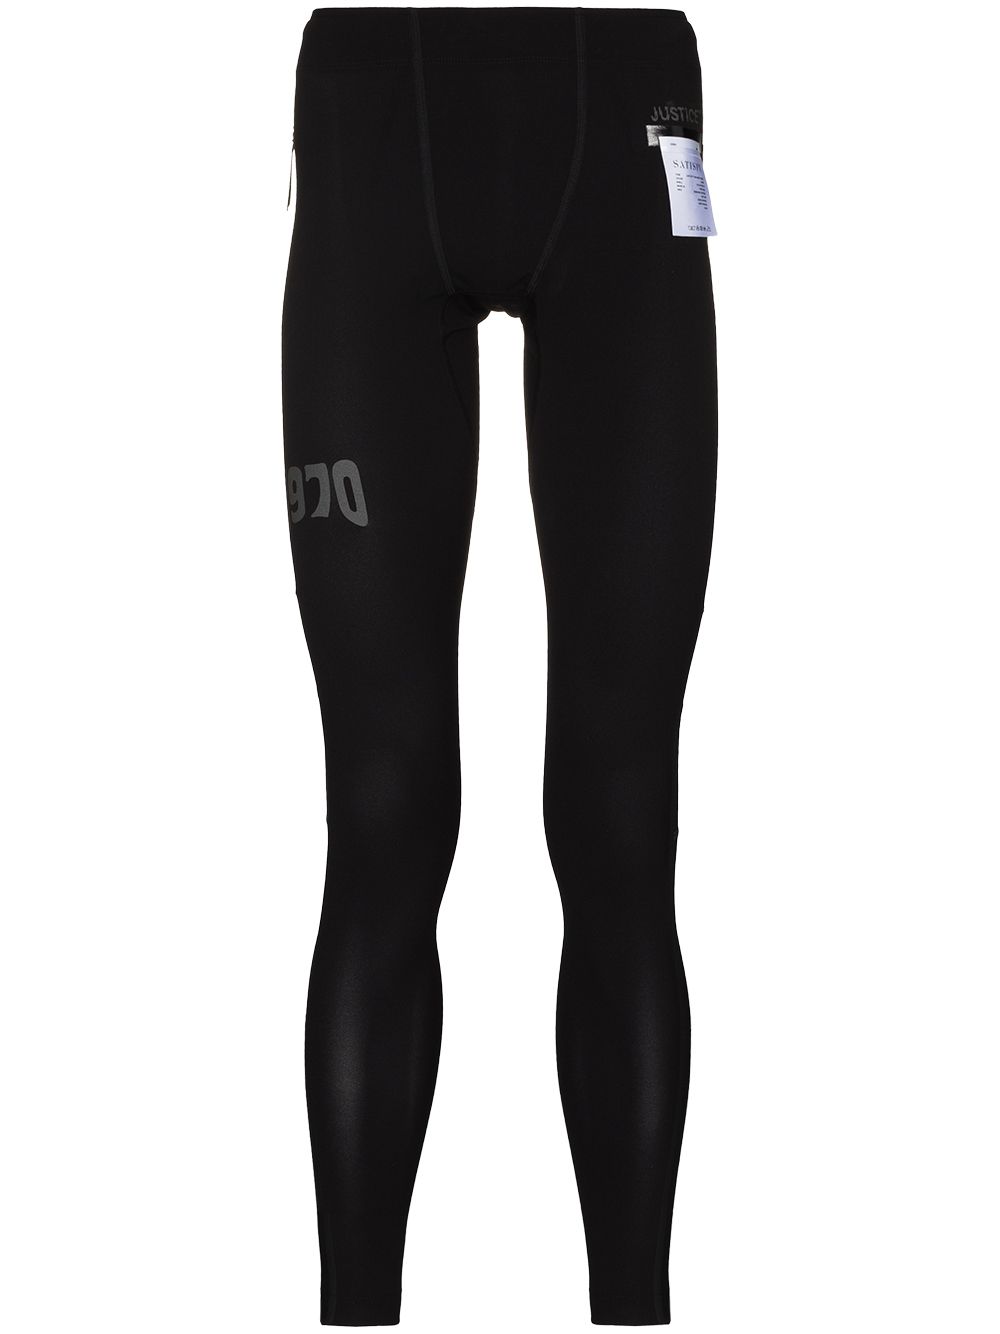 New Arrivals for Men's, Women's and Kid's  Stirling Sports - Black  Sculpting Wrap Tights